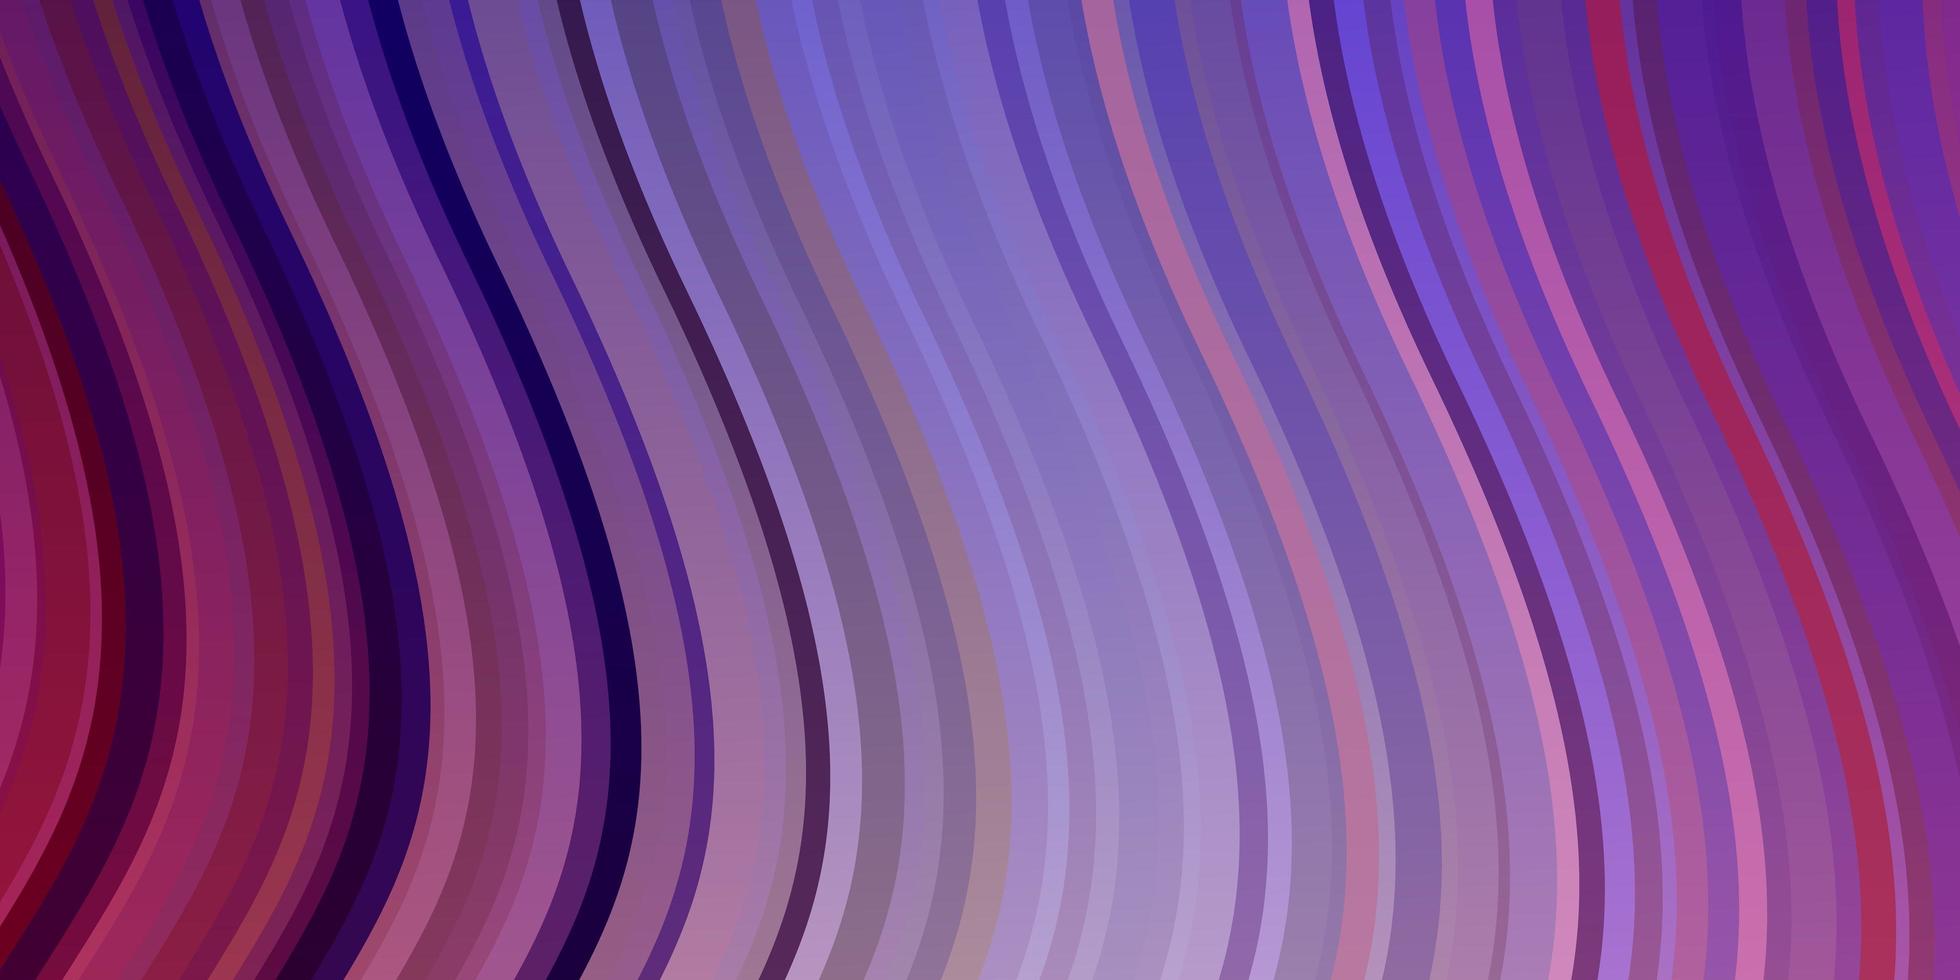 Light Purple, Red layout with curves. vector